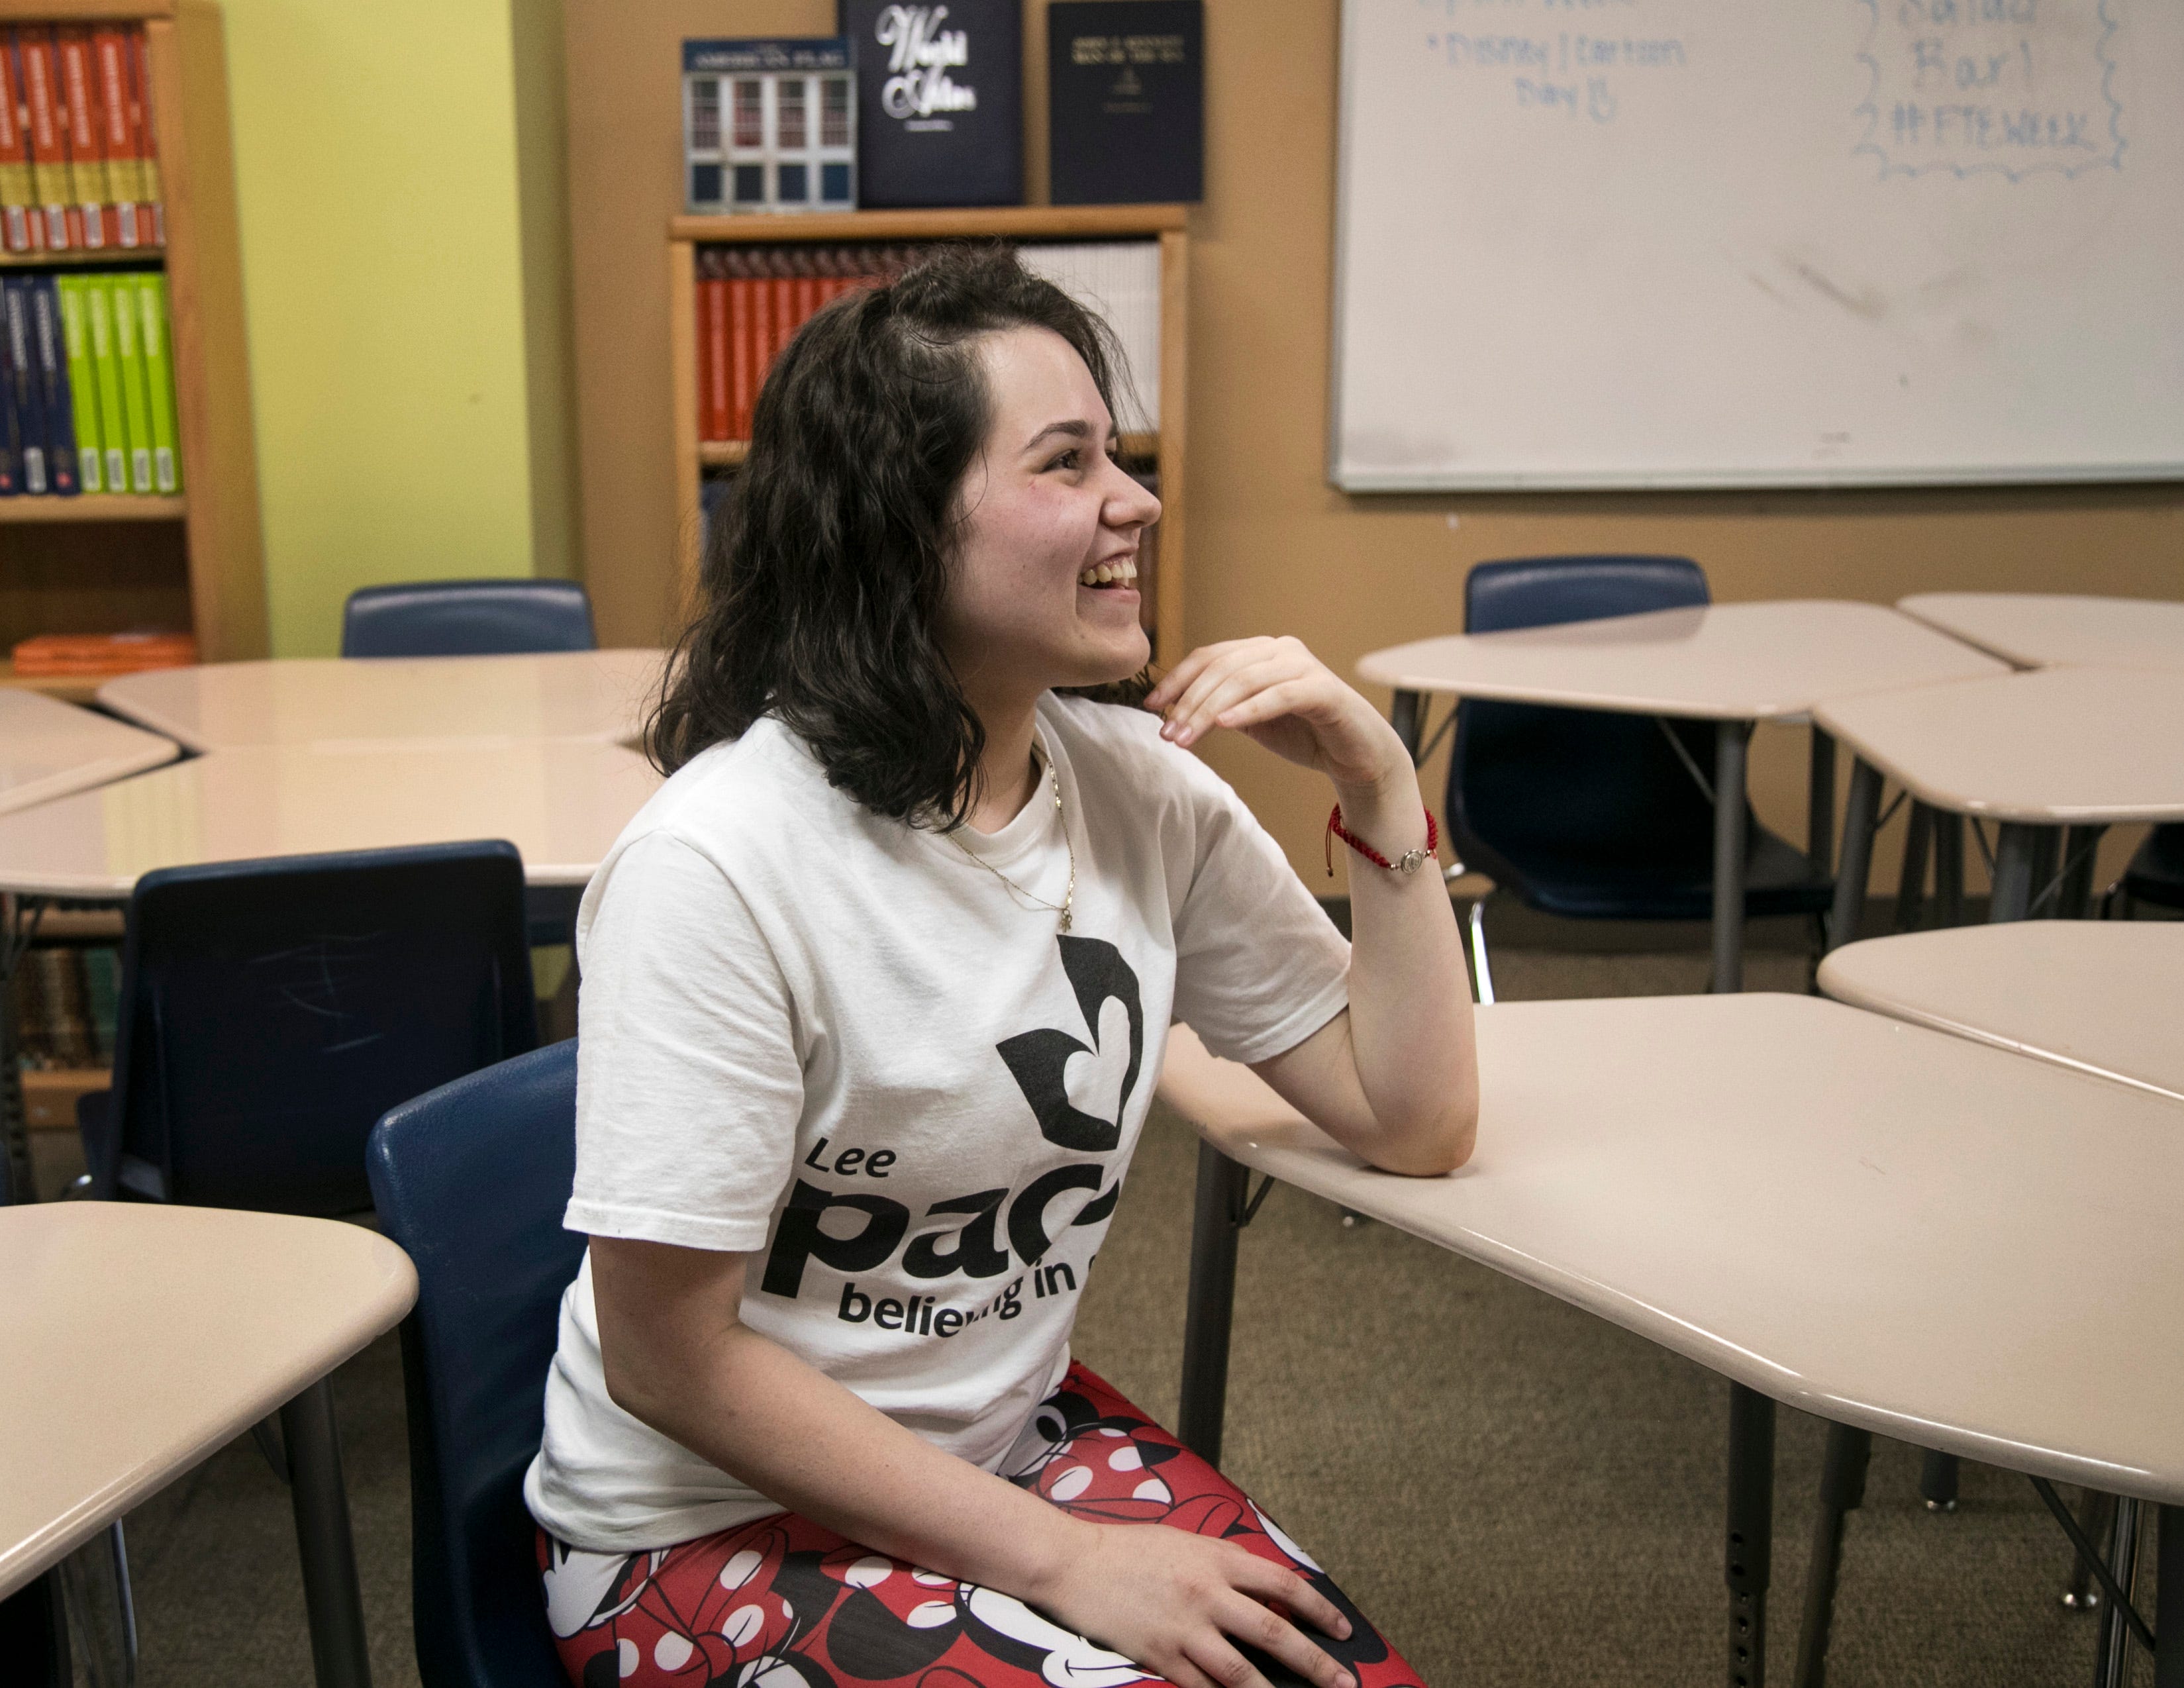 Lizandra went to the PACE Center for Girls after struggling with depression and suicidal thoughts and falling behind in high school. She has improved with counseling there.